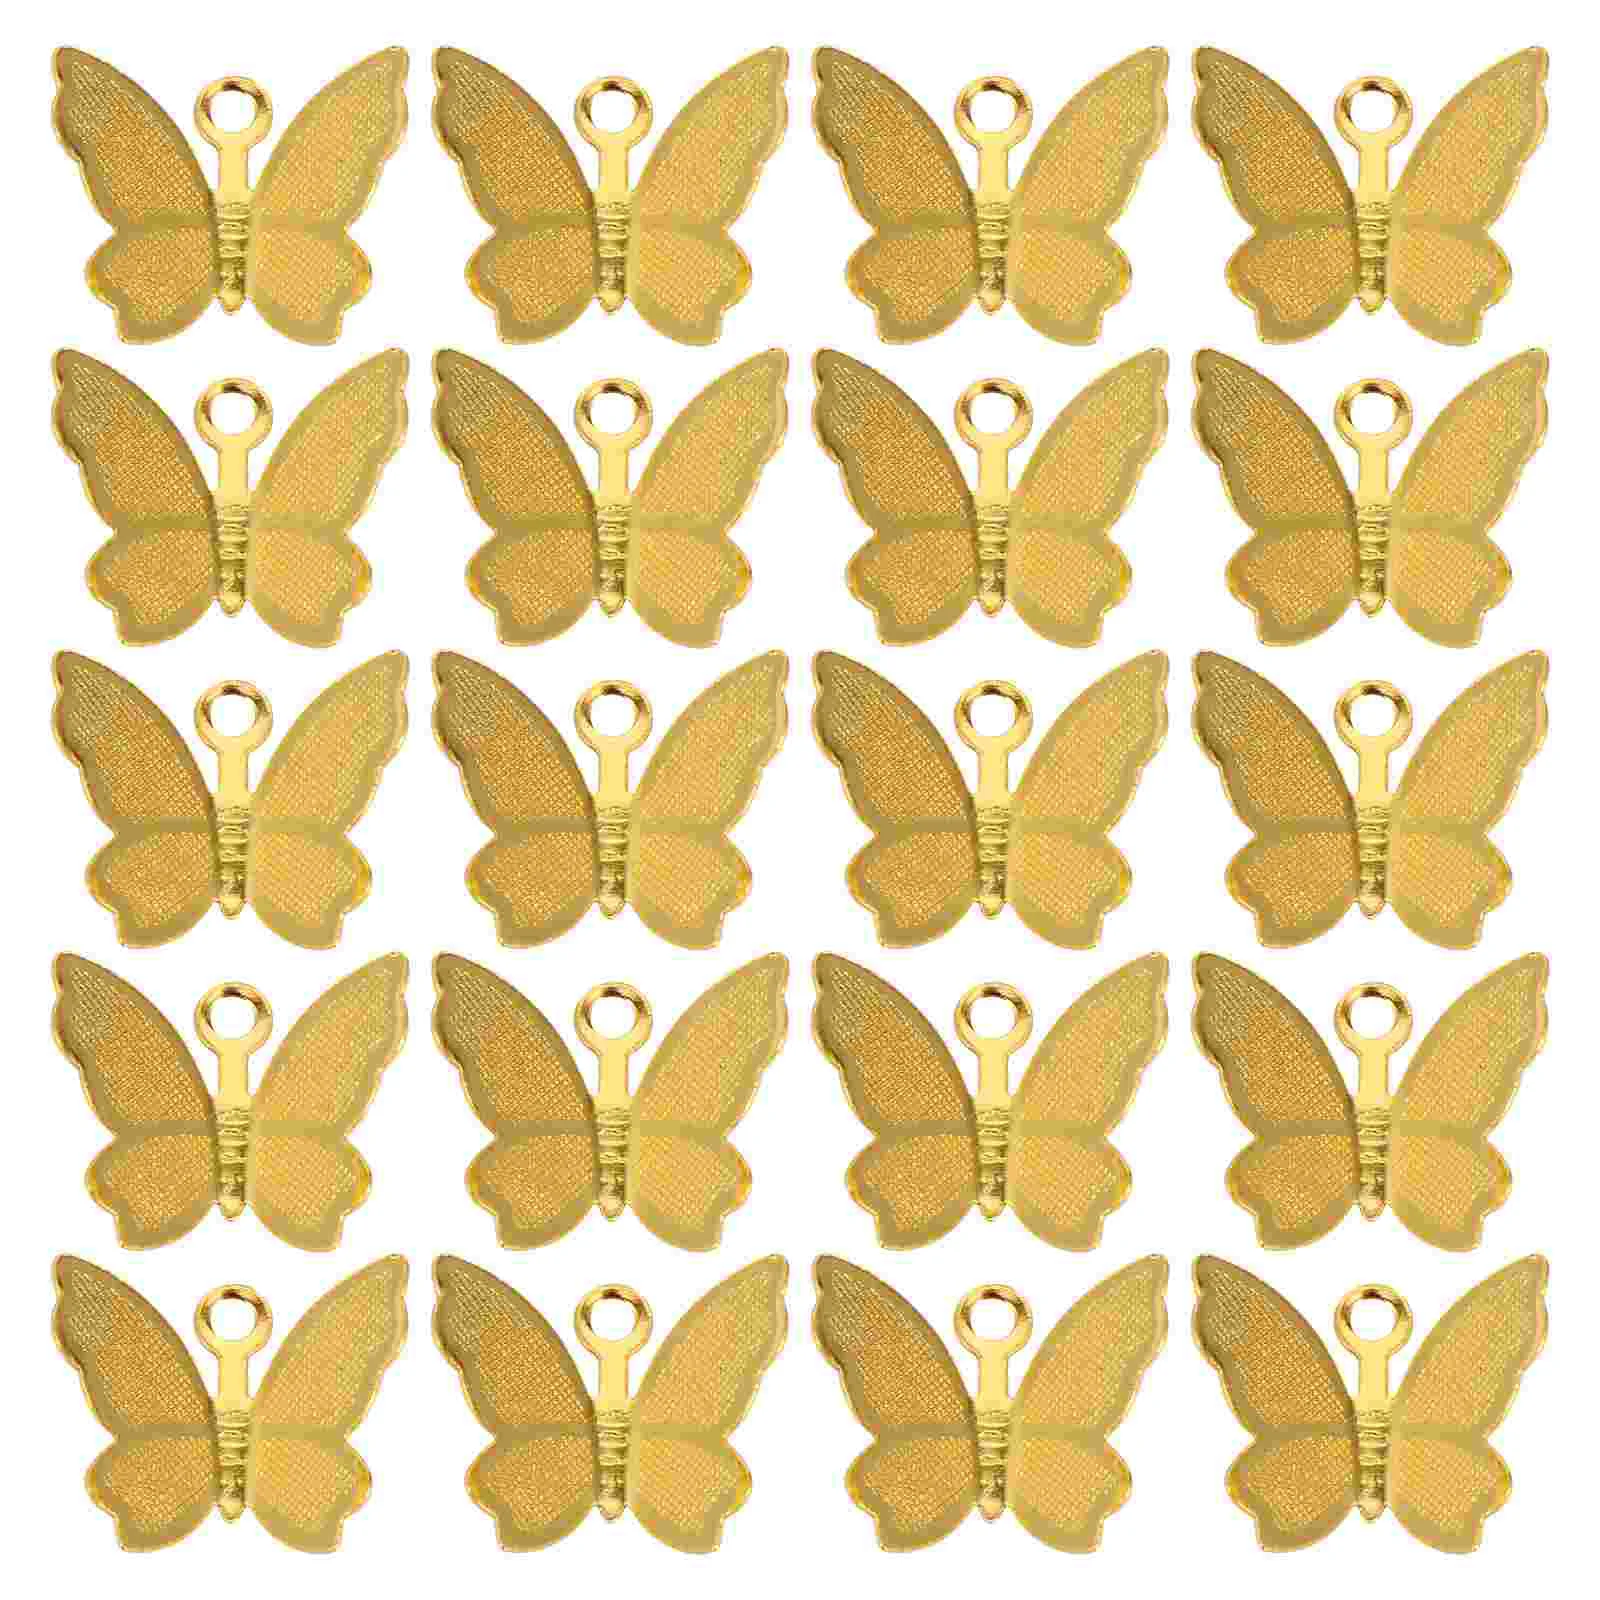 

50pcs Butterflies Pendant Durable Stylish Pretty Fashion Exquisite Jewelry Making Charms Butterflies Charms Copper Charm Craft